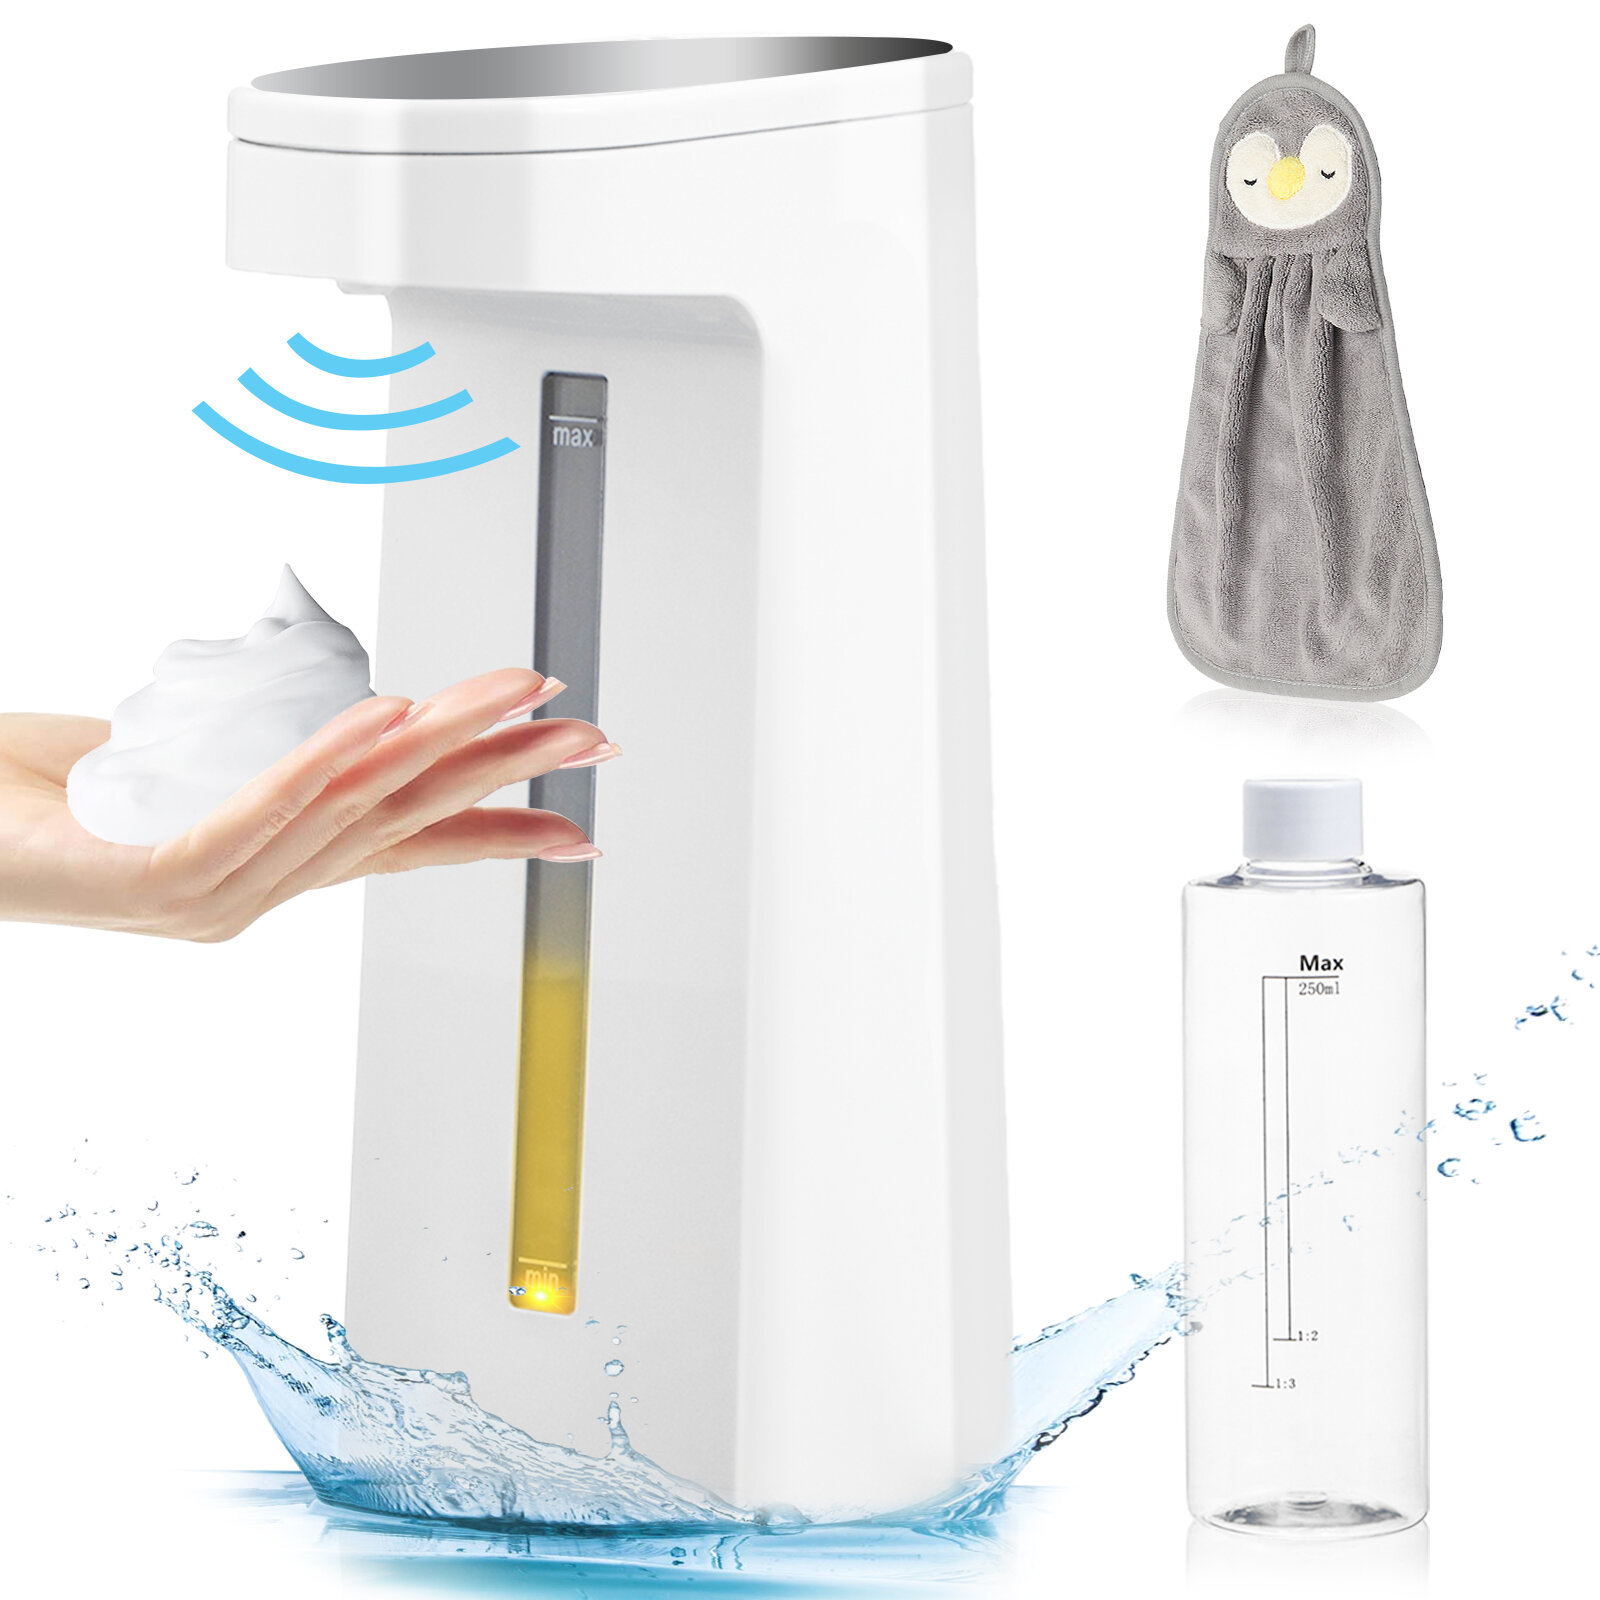 

GEMITTO Automatic Foaming Soap Dispenser 250ml/ 8.5oz Touchless Soap Dispenser Waterproof Hand Washer